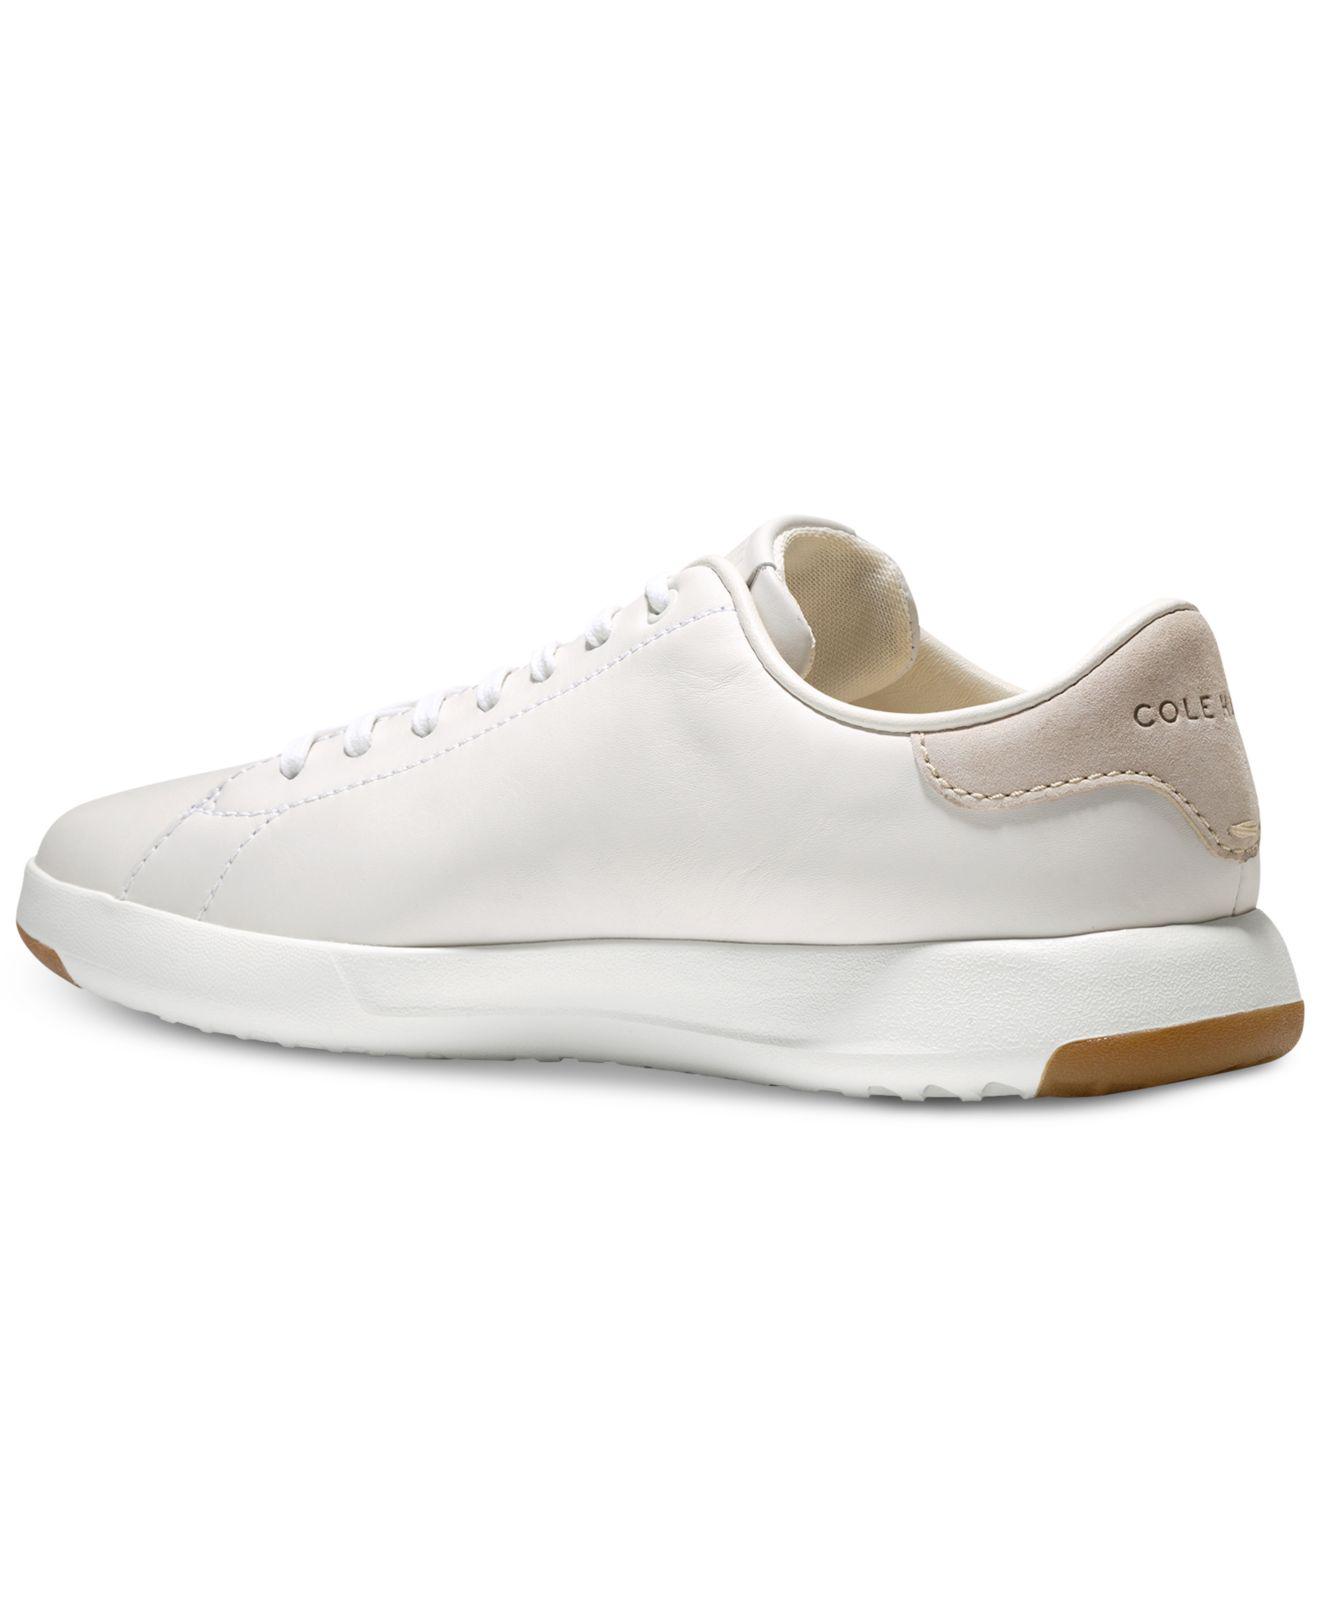 Cole Haan Men's Grandpro Leather Tennis Sneakers in White for Men - Lyst